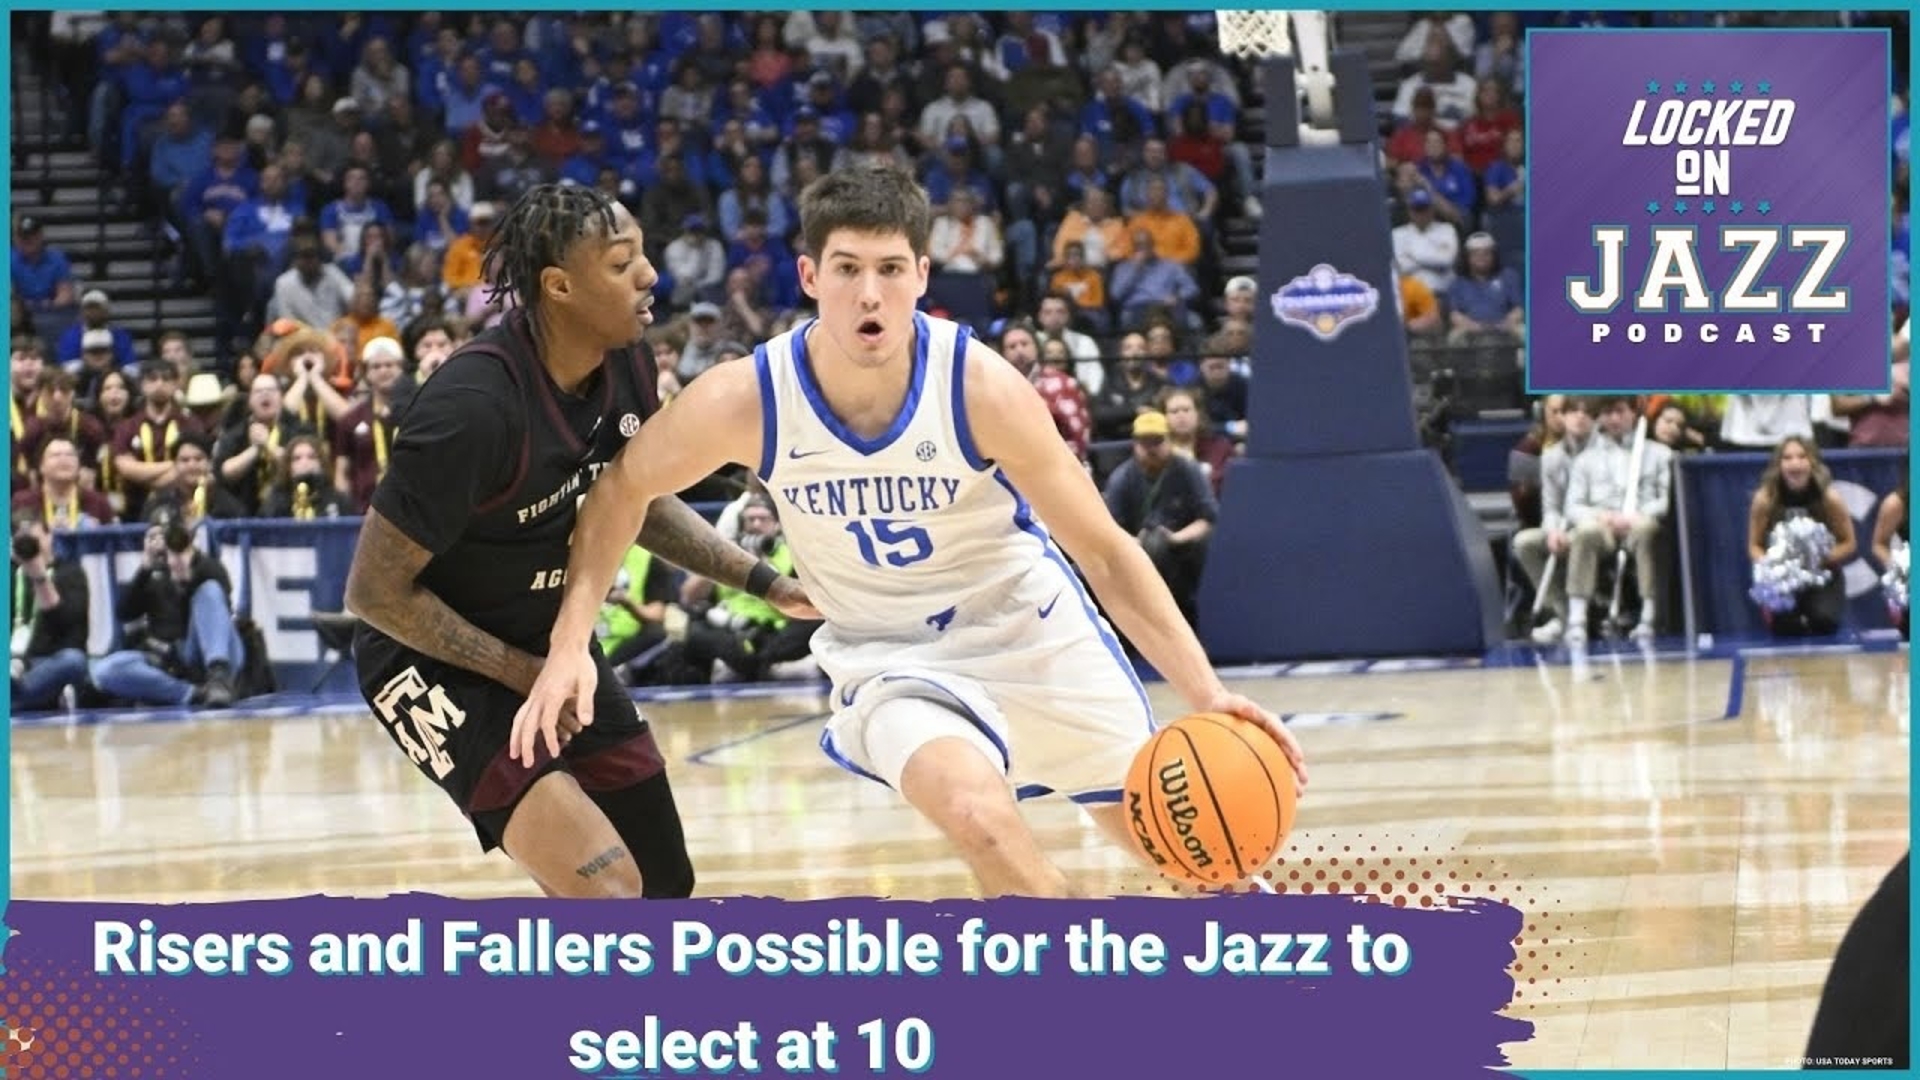 Leif Thulin analyzes the NBA Draft rumors which are circulating and tells Jazz fans which players are rising and who is falling.